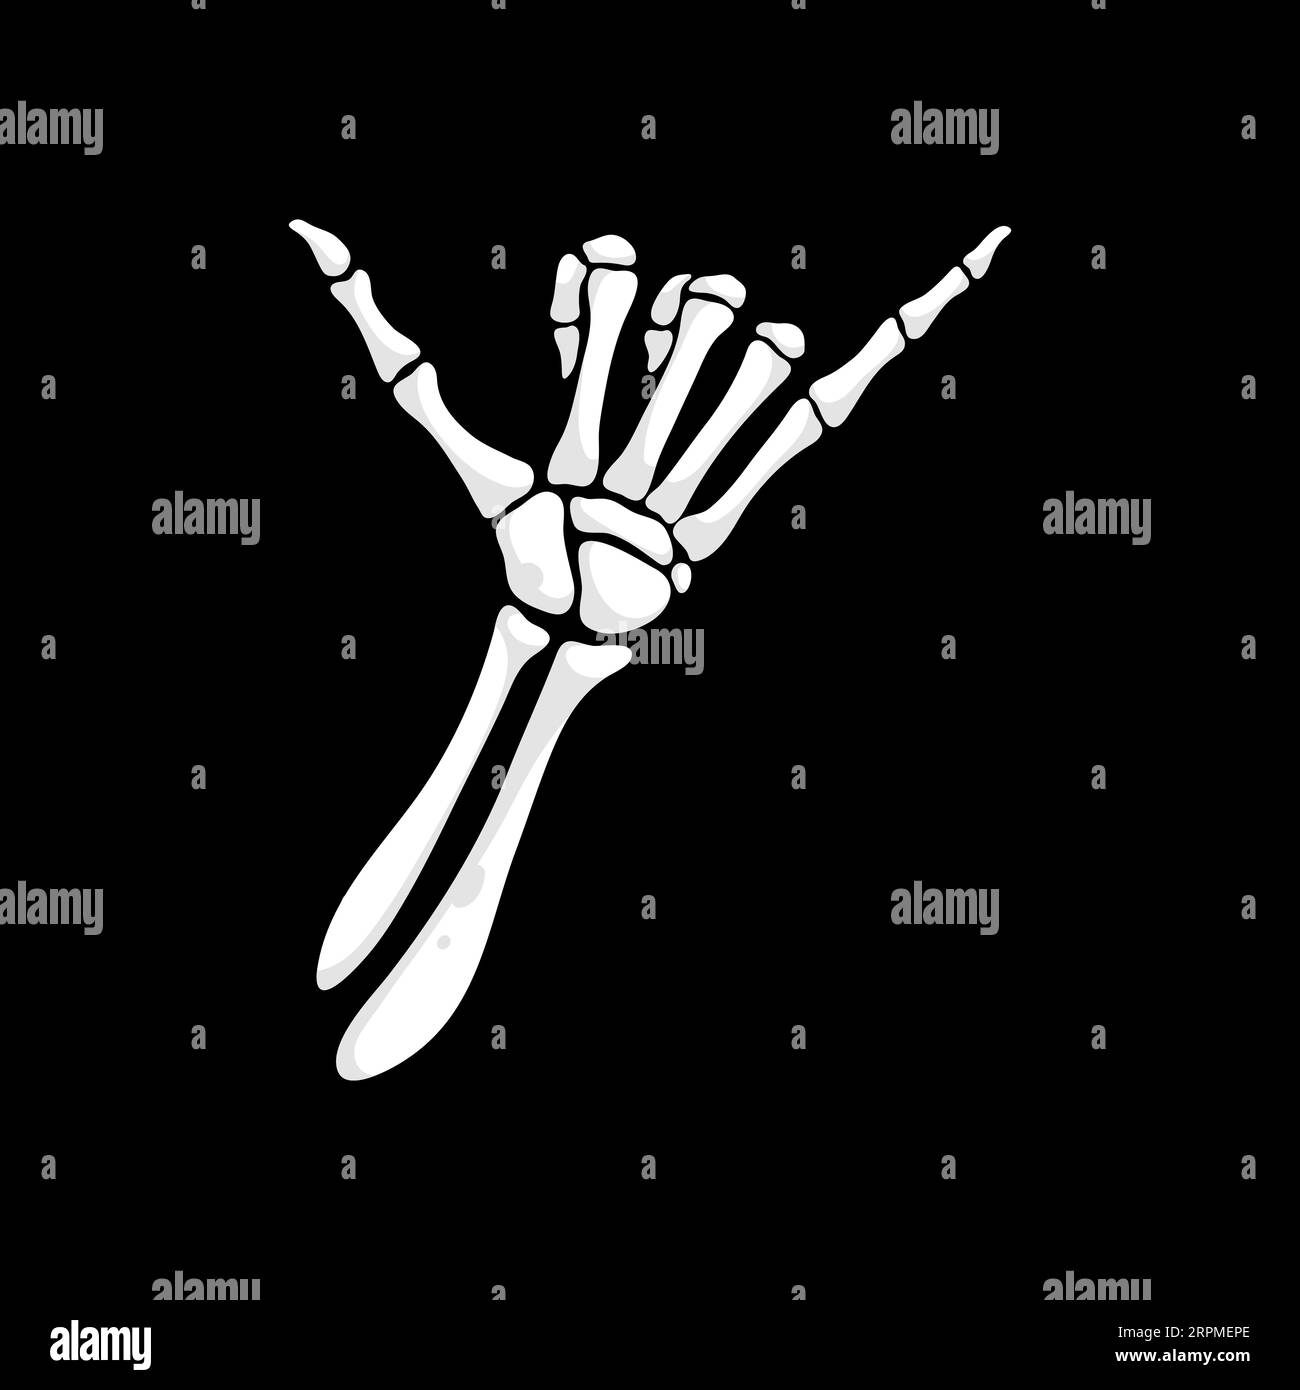 Skeleton hand making hang loose, surf or shaka sign gesture with bony fingers. Isolated vector skeletal palm creating a haunting sight that evokes a sense of mystery. Aloha cool gesturing symbol Stock Vector